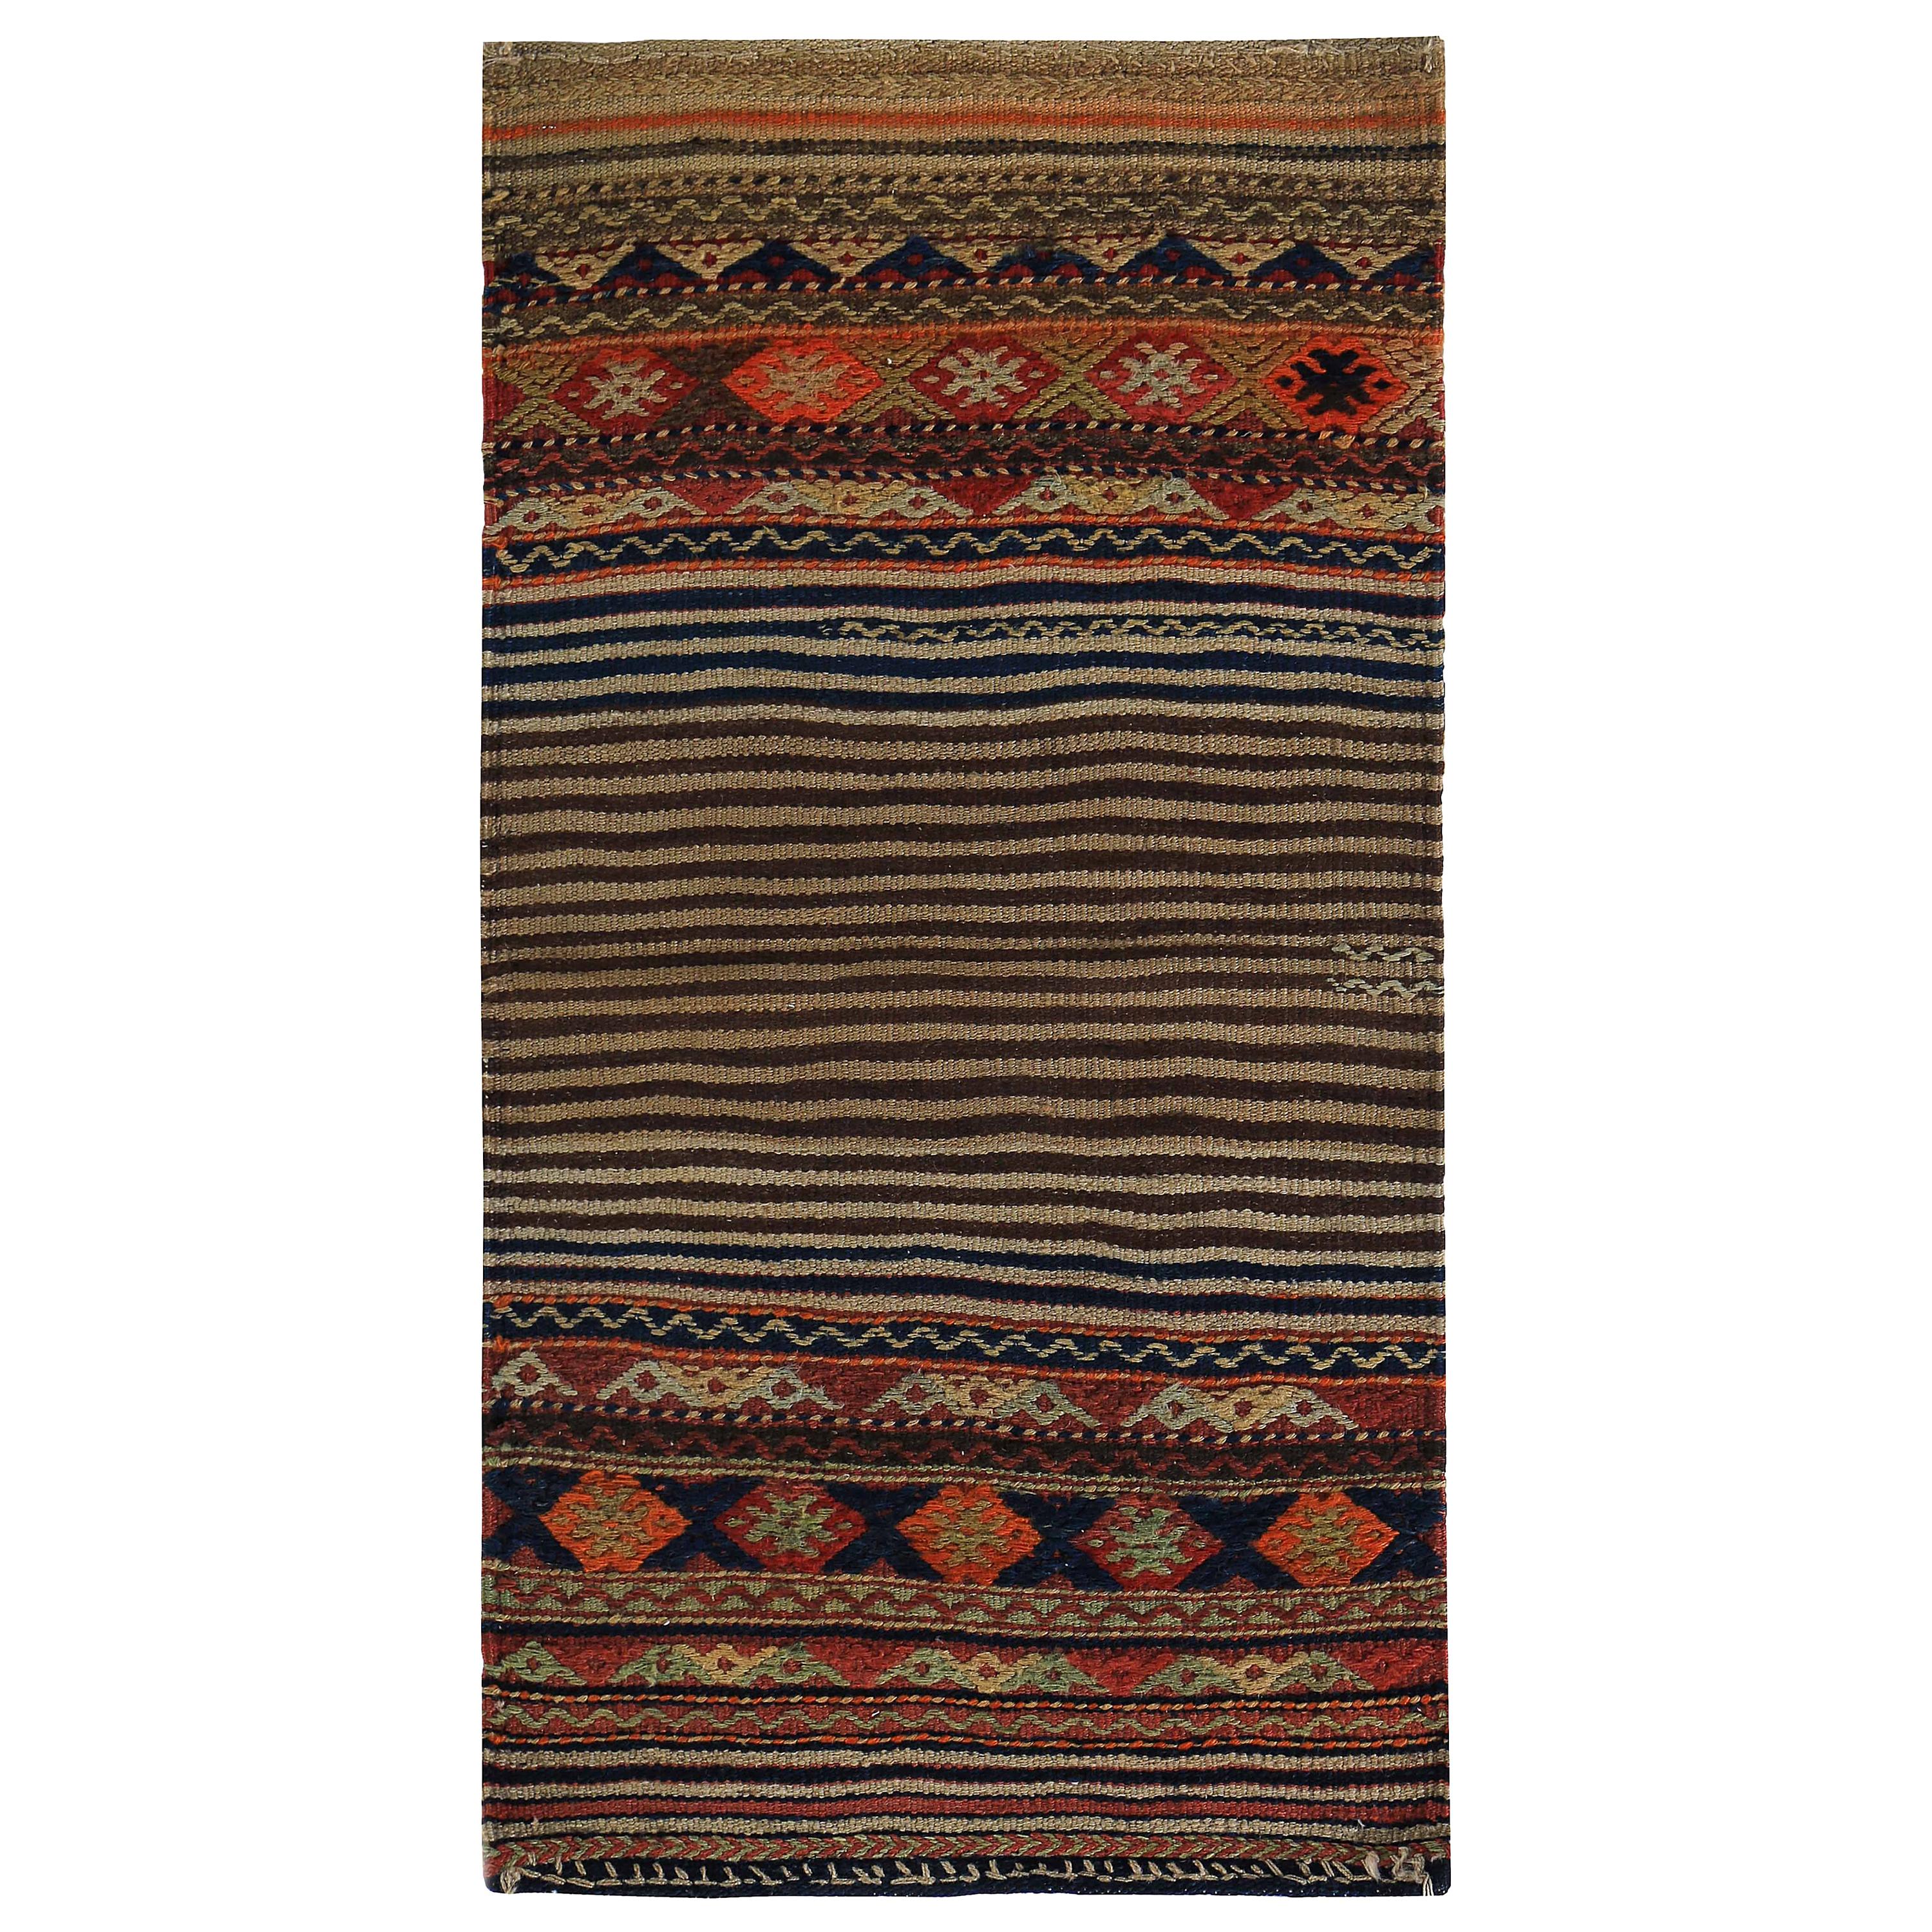 Modern Turkish Kilim Rug with Mixed Orange and Brown Tribal Details For Sale